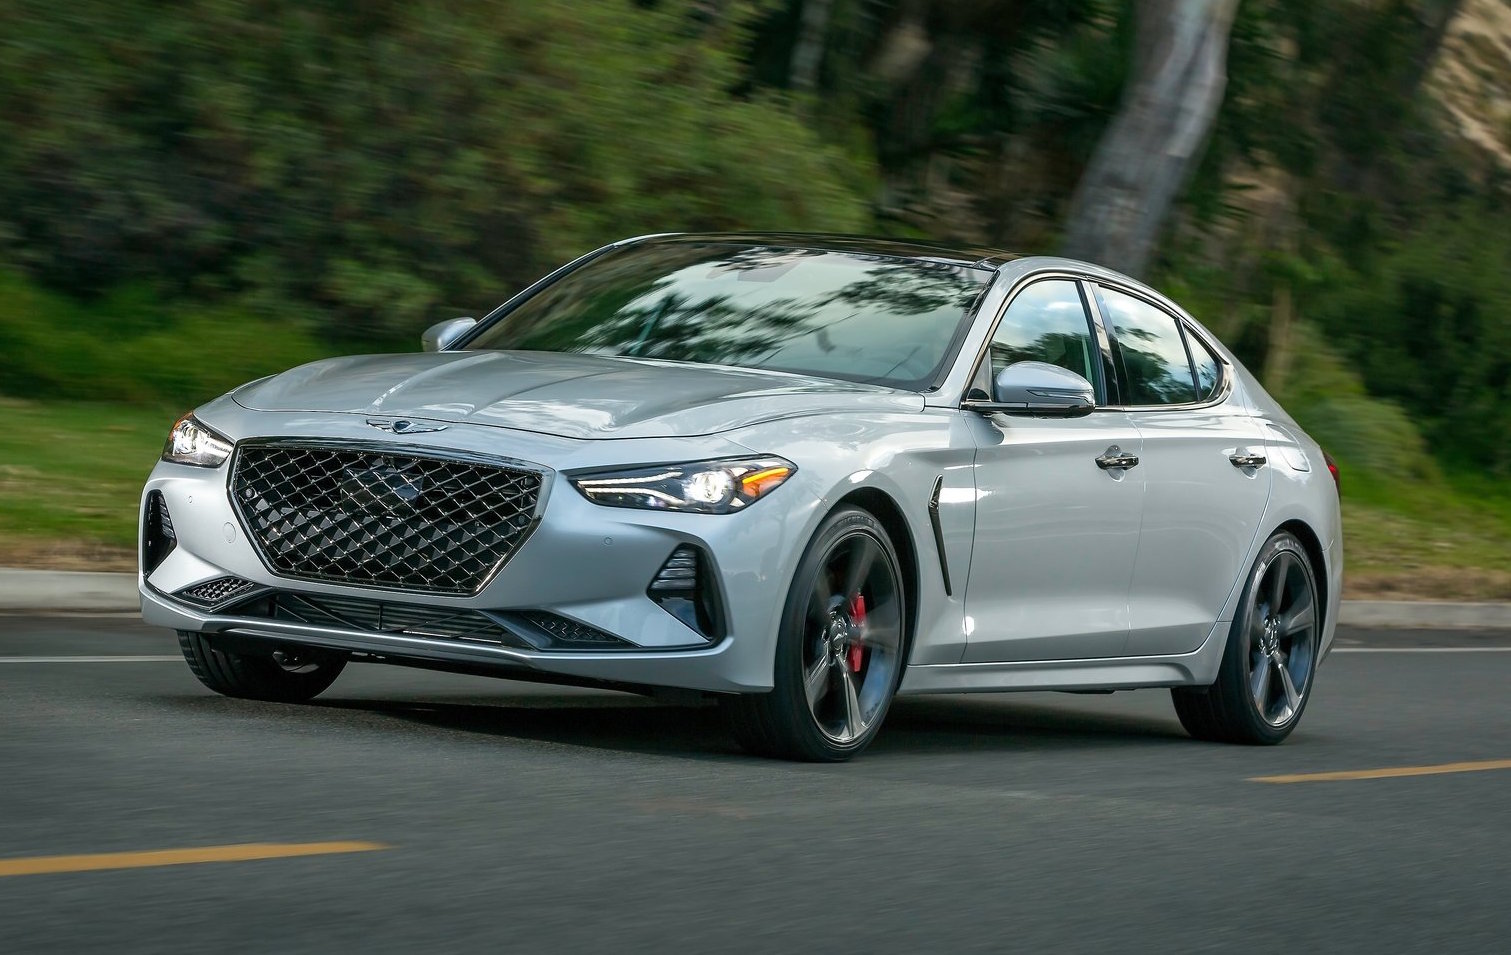 Genesis tops 2020 Vehicle Dependability Study, Tesla declined to participate